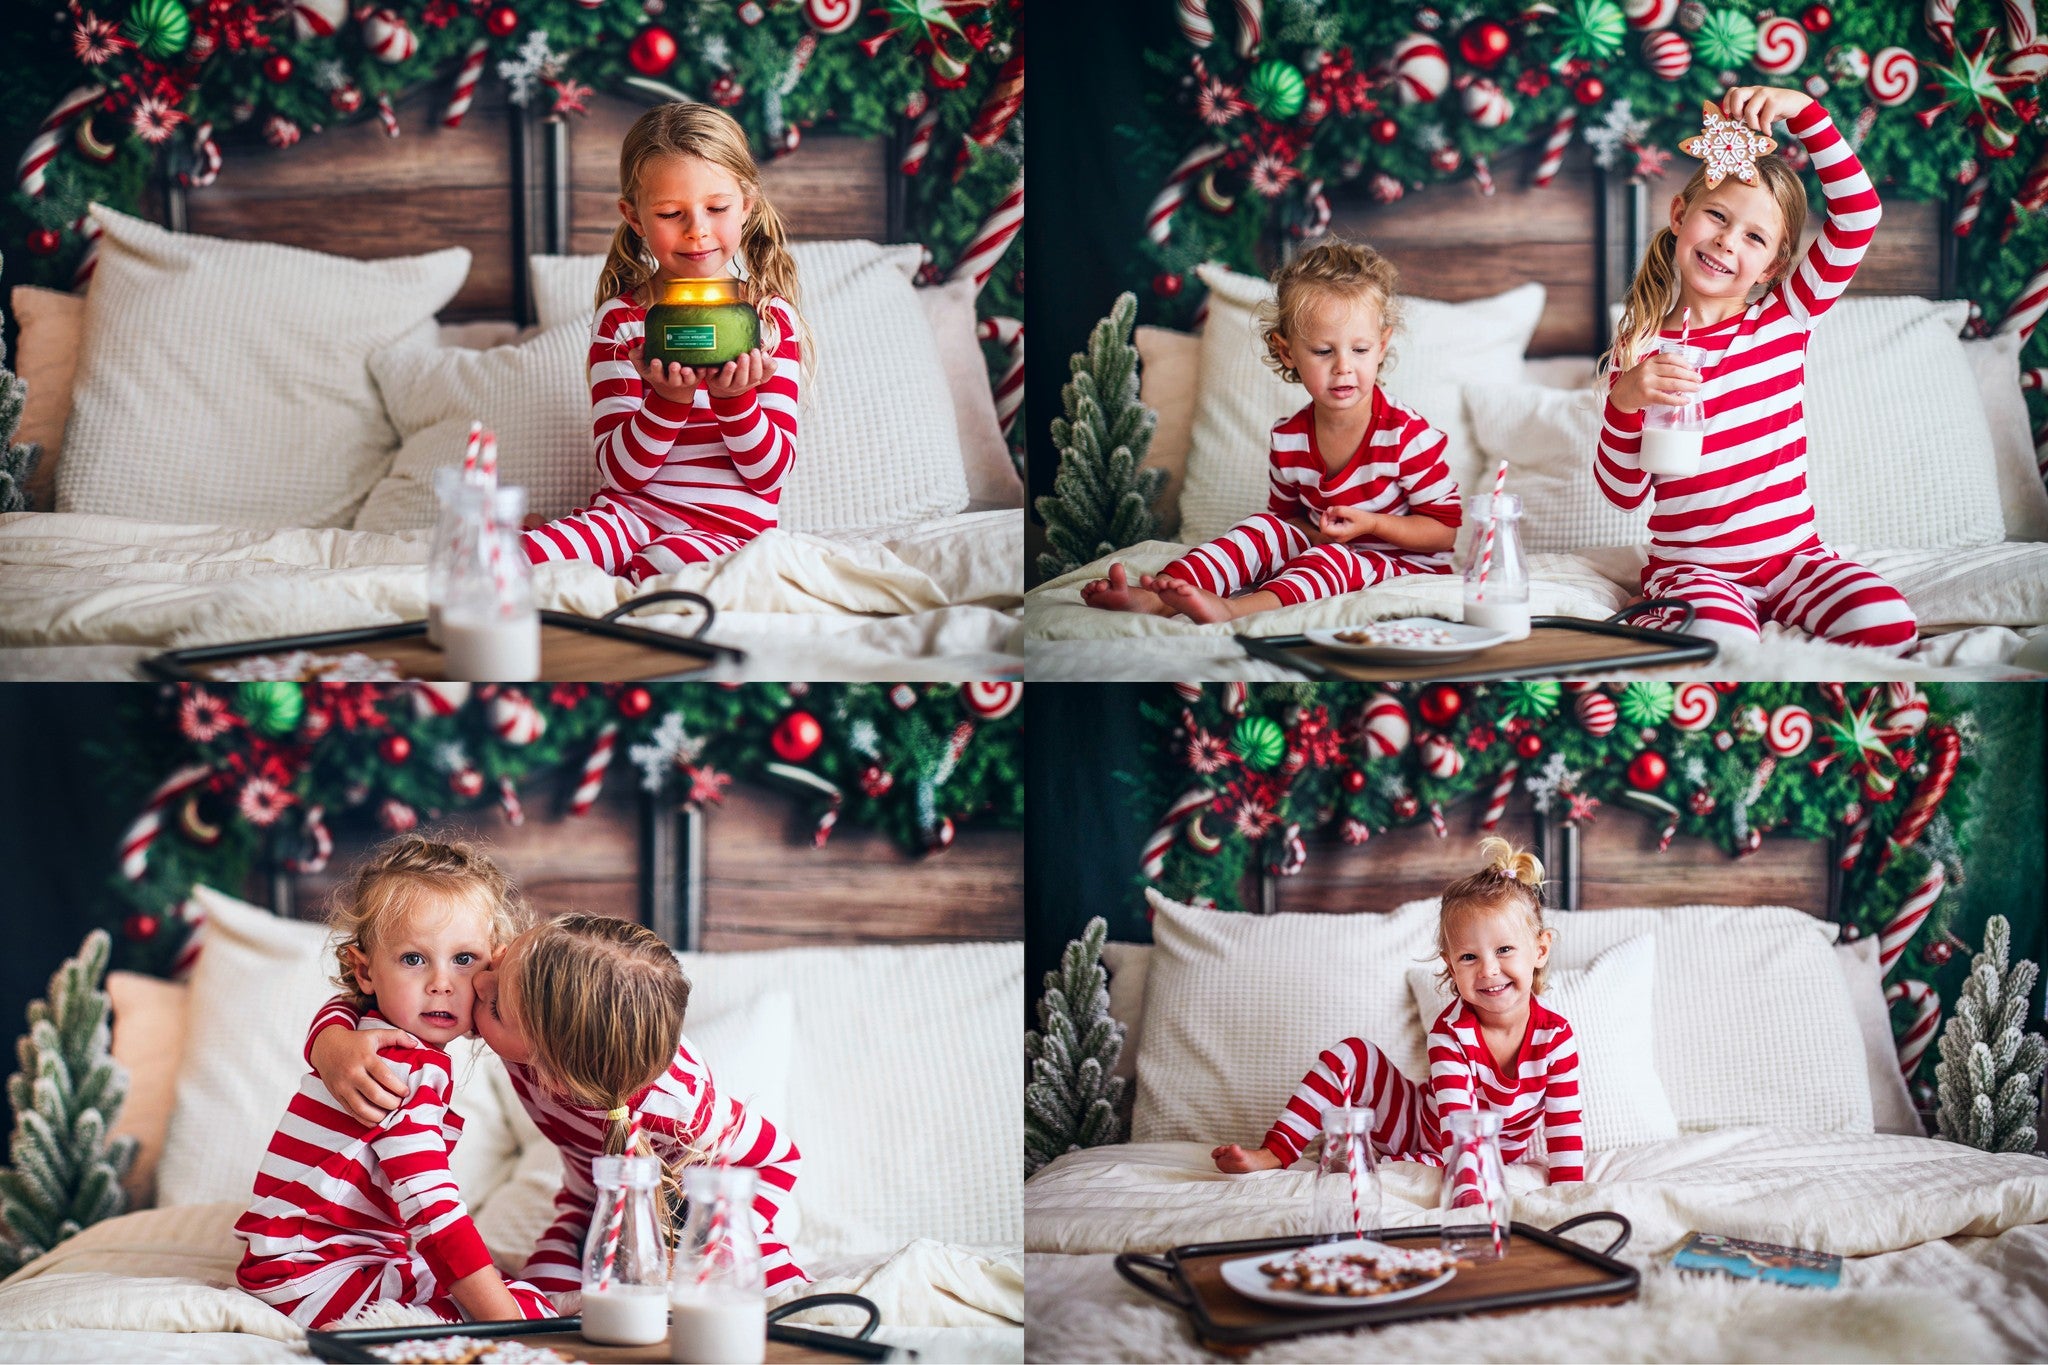 Kate Christmas Candy Cane Headboard Backdrop Designed by Mandy Ringe Photography